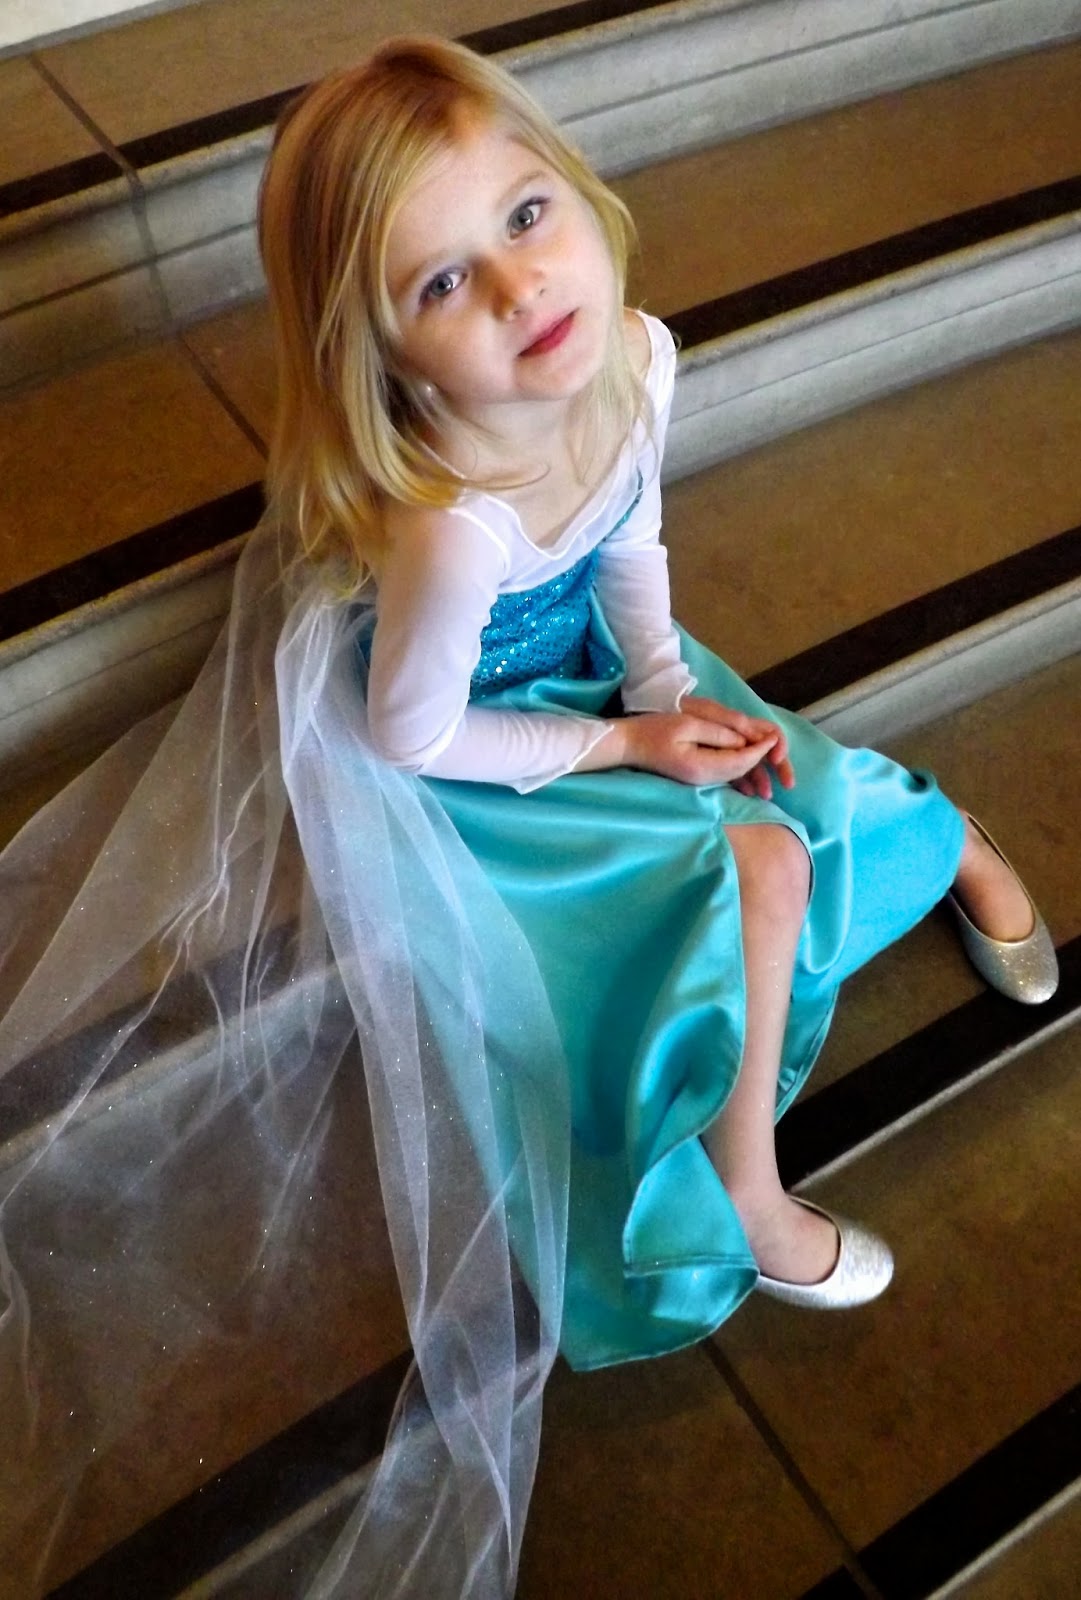 Awesome list of 20+ DIY Elsa Costume Dresses and accessories! It's giving me some inspiration as to how I want to make my daughter's Queen Elsa dress from Disney's Frozen for Halloween.